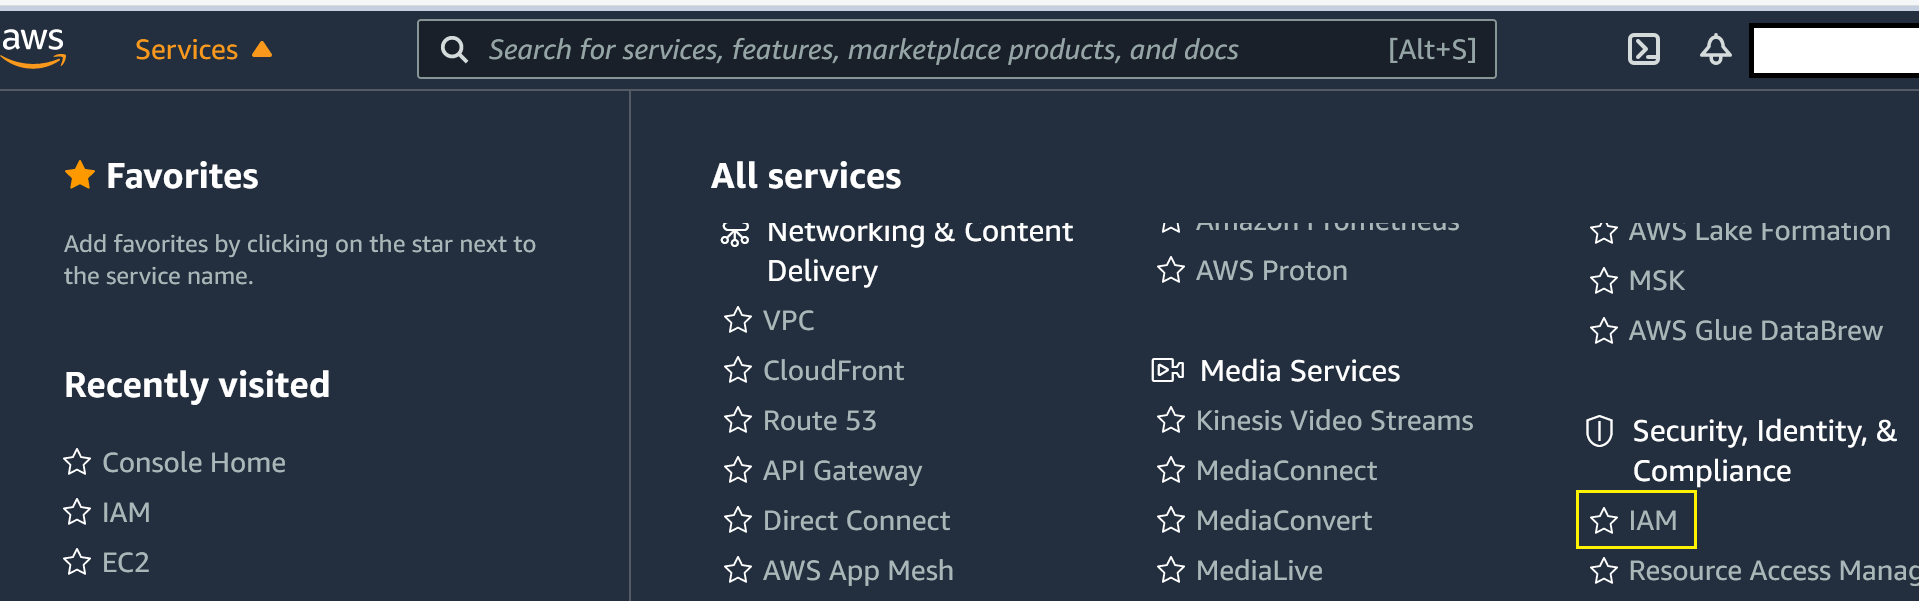 AWS Management Console showing services drop-down menu and IAM selection.